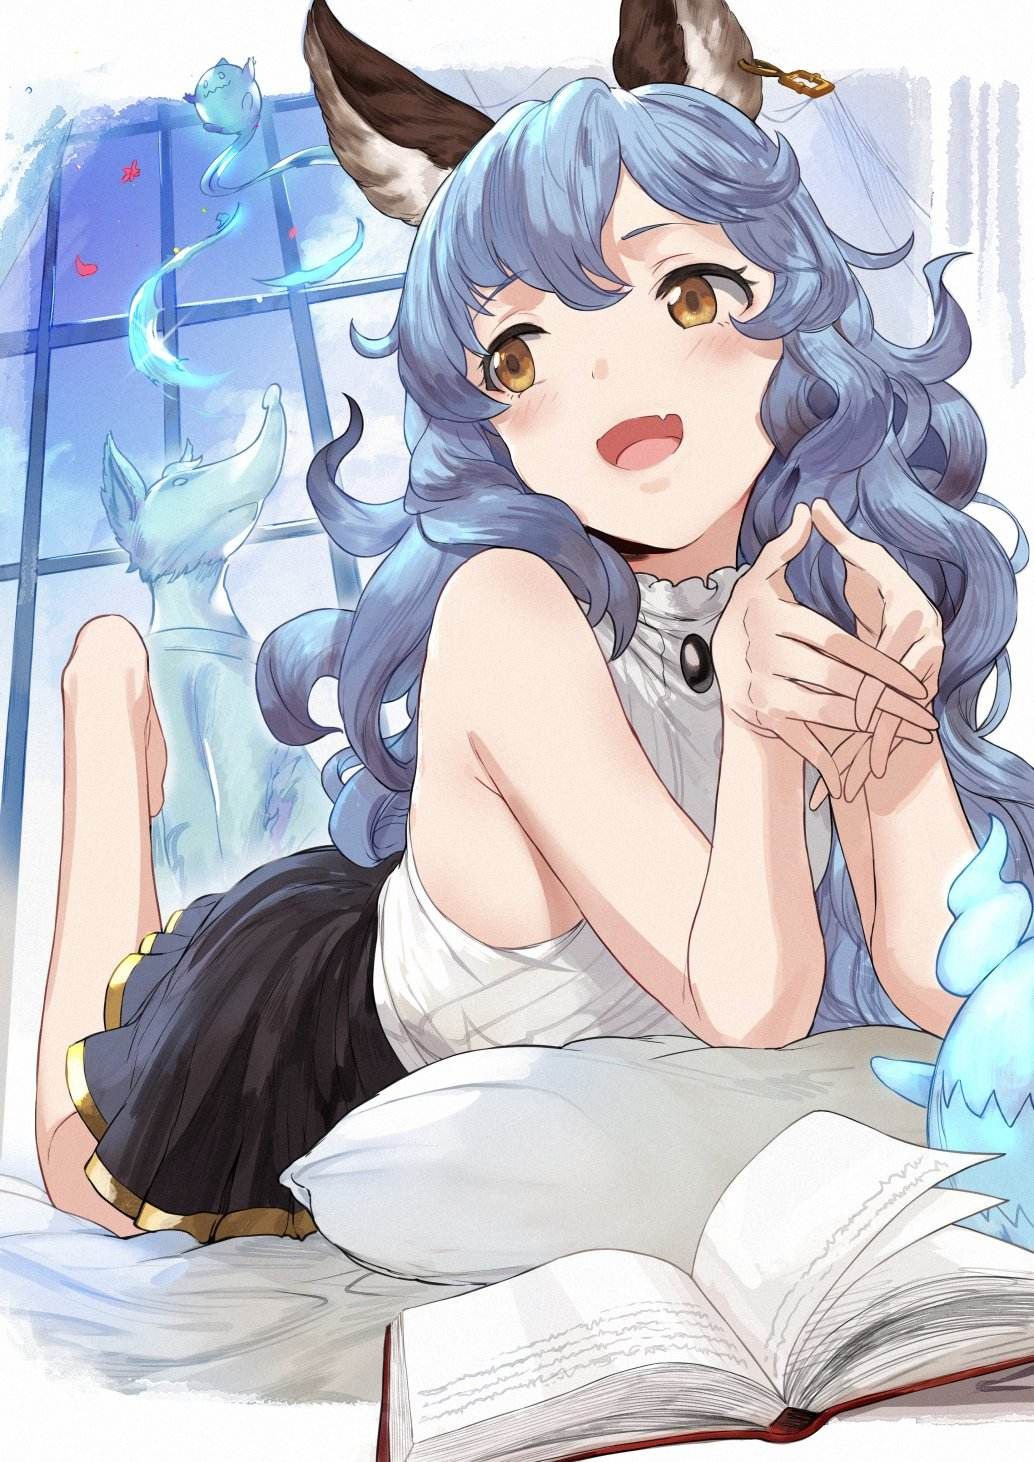 Erotic image that can be pulled out just by imagining the masturbation figure of Ferri [Granblue Fantasy] 13